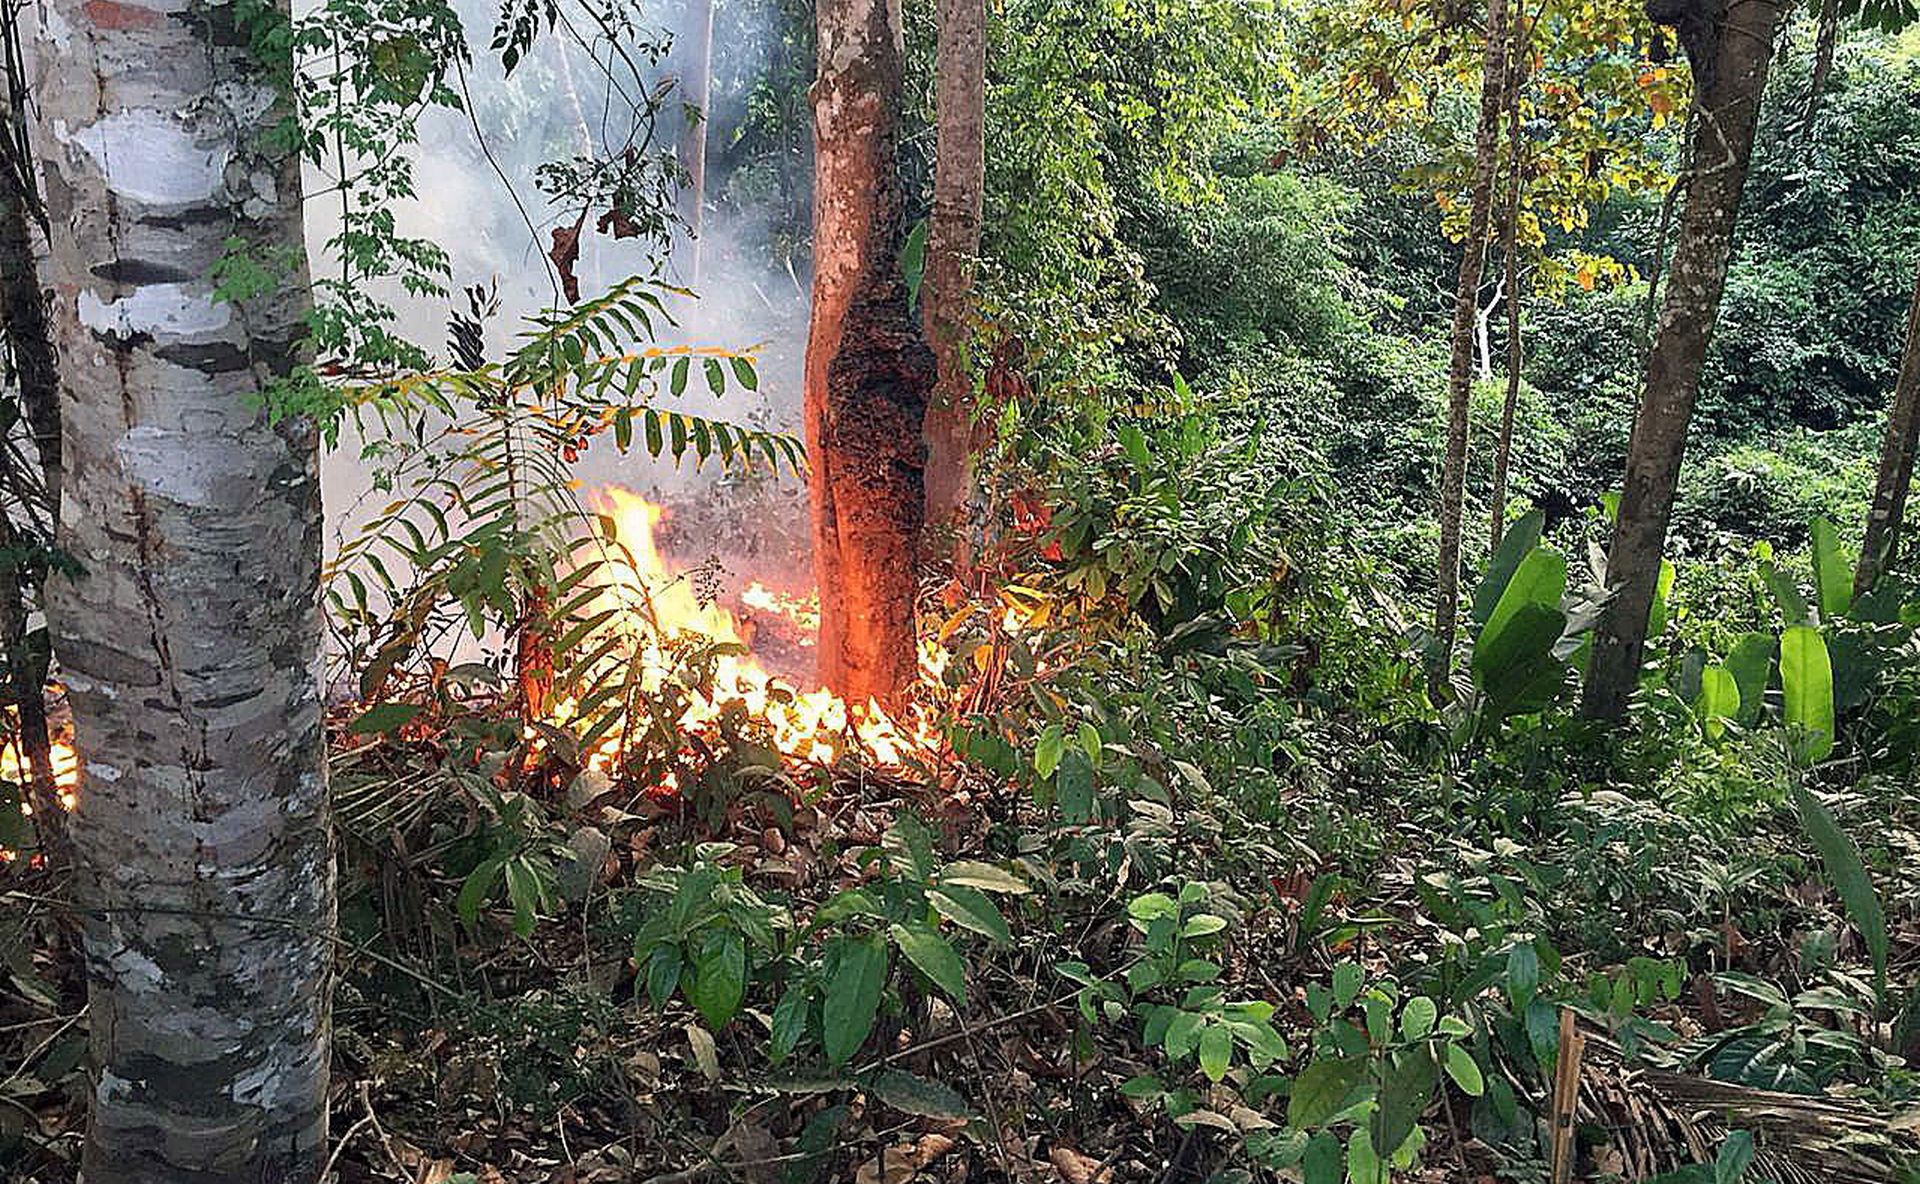 epa07787036 A handout picture provided by Porto Velho's Firefighters shows a fire at the Brazilian Amazonia, in Porto Velho, capital of Rondonia, Brazil, 18 August 2019 (issued 22 August 2019). The Brazilian region of the Amazonia has registered over half of the 71,497 fires detected this year between January and August, an 83 percent increase over the the same period last year according to Brazil's National Institute for Space Research (INPE).  EPA/Porto Velho Firefighters HANDOUT  HANDOUT EDITORIAL USE ONLY/NO SALES/NO ARCHIVES